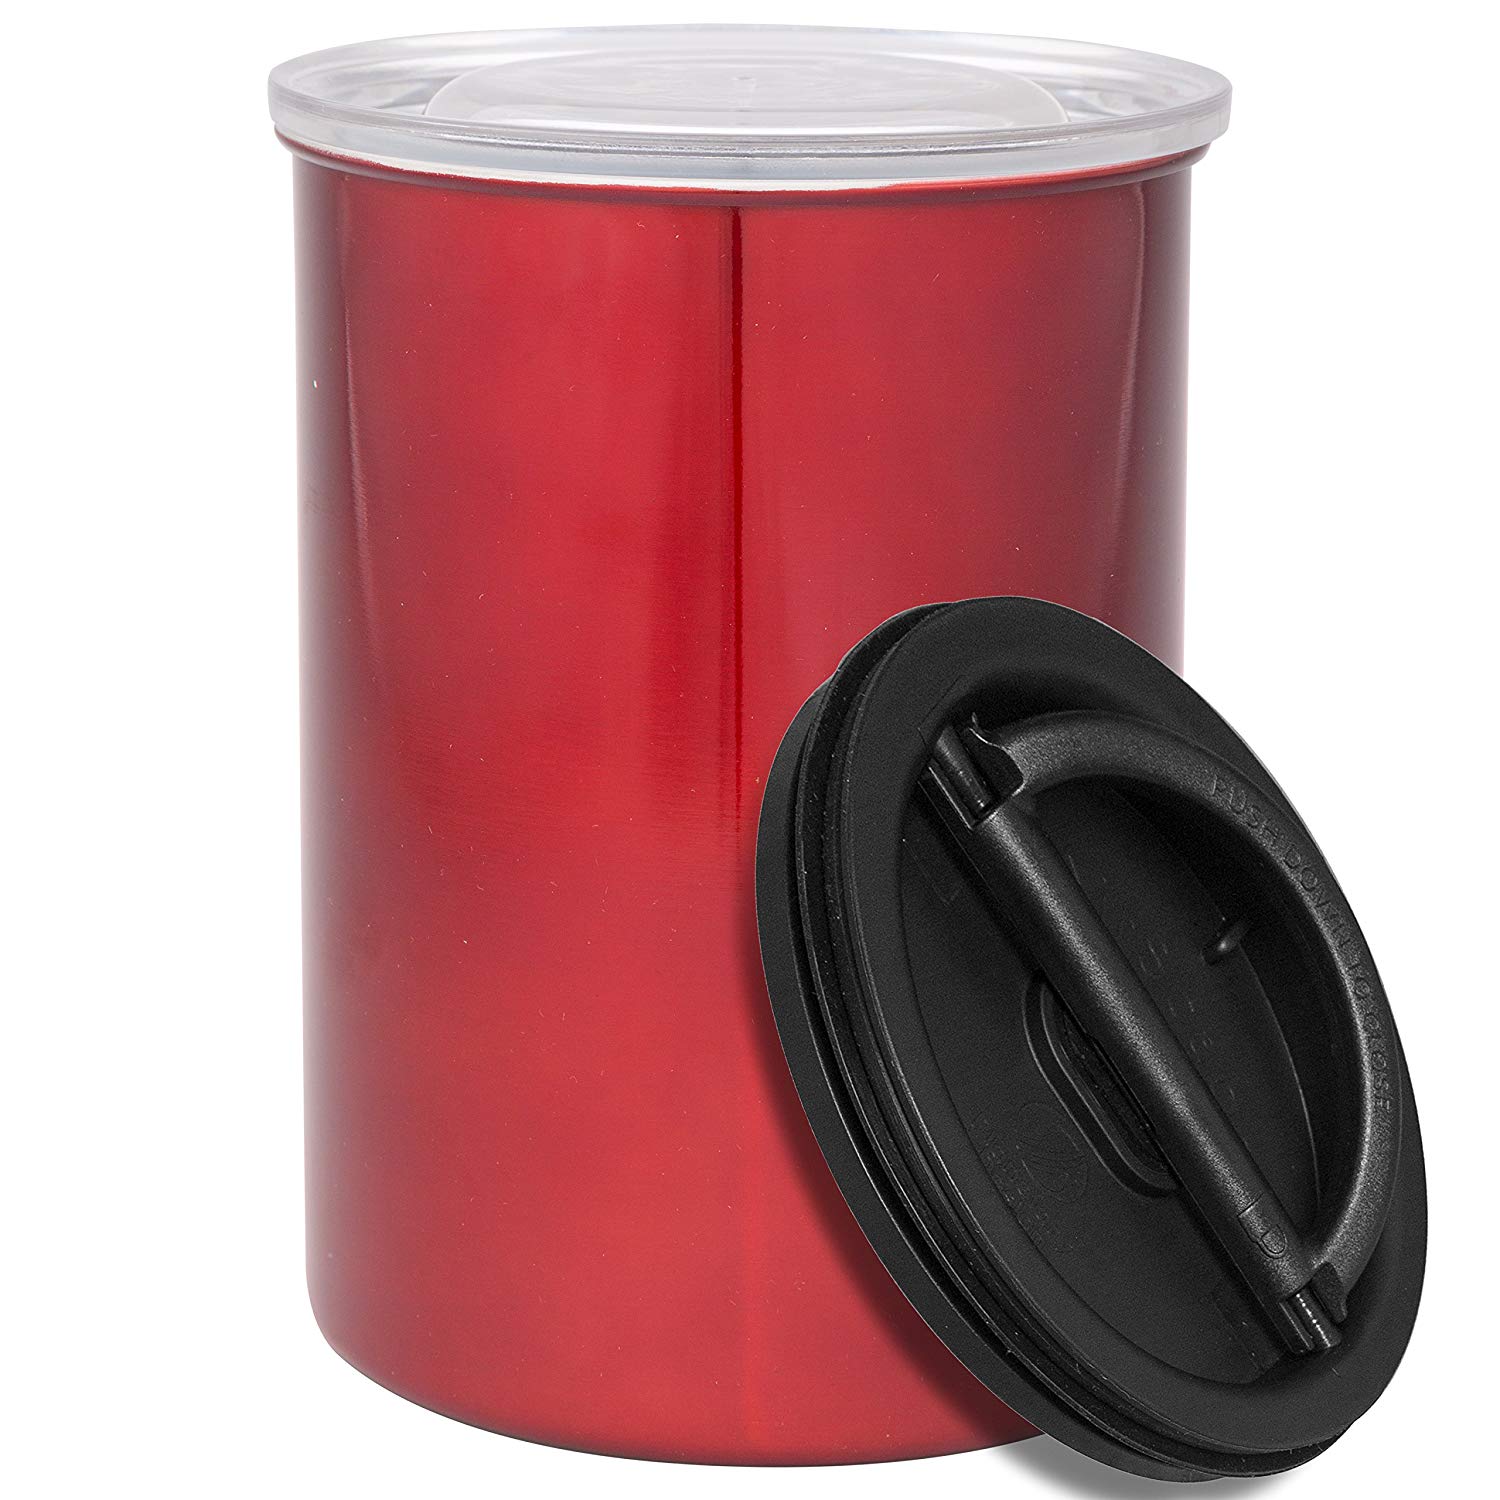 Planetary Design AirScape Classic Stainless Steel 64oz Coffee Canister 7" - Candy Apple Red